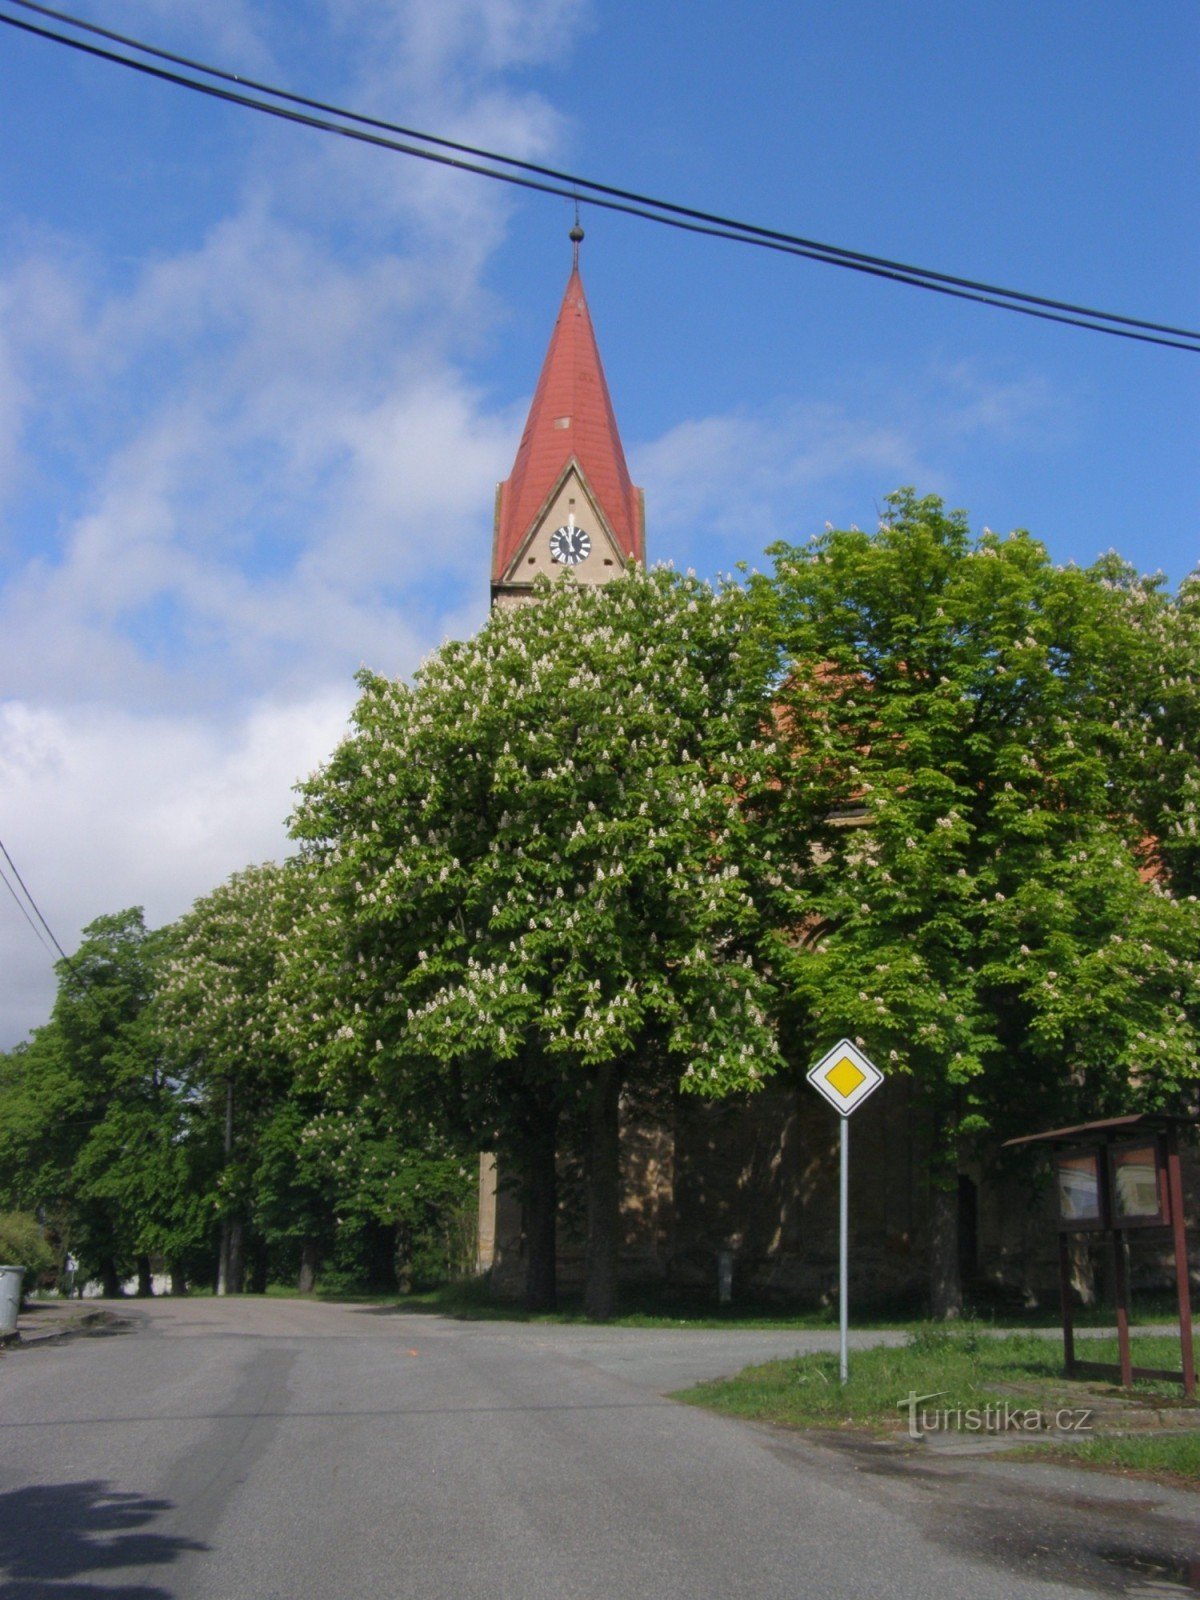 Grandmother - Church of St. Peter and Paul